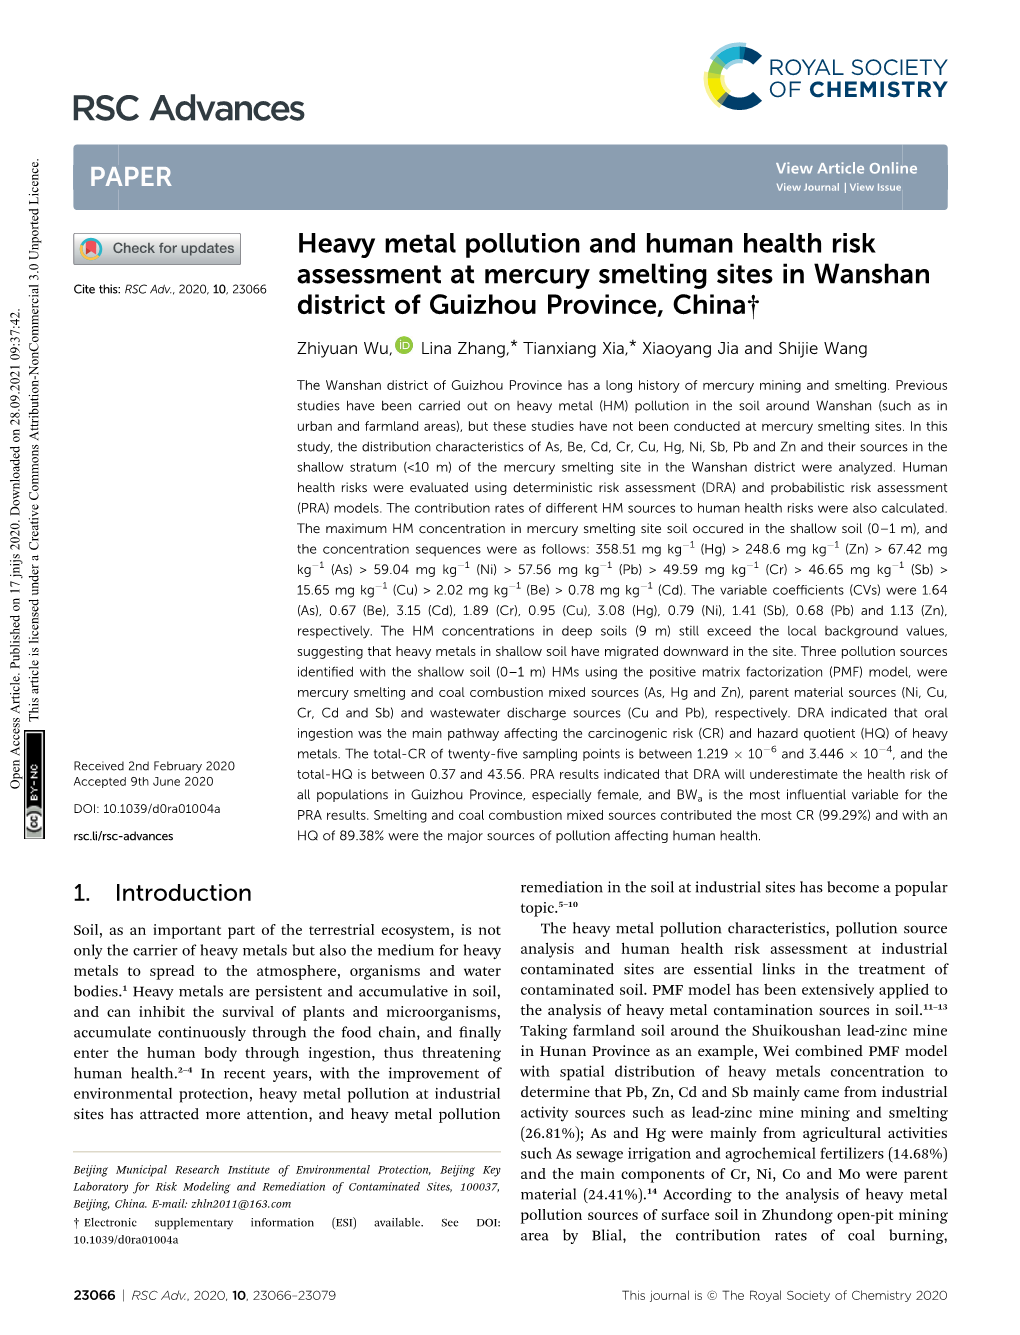 Heavy Metal Pollution and Human Health Risk Assessment at Mercury Smelting Sites in Wanshan Cite This: RSC Adv., 2020, 10,23066 District of Guizhou Province, China†